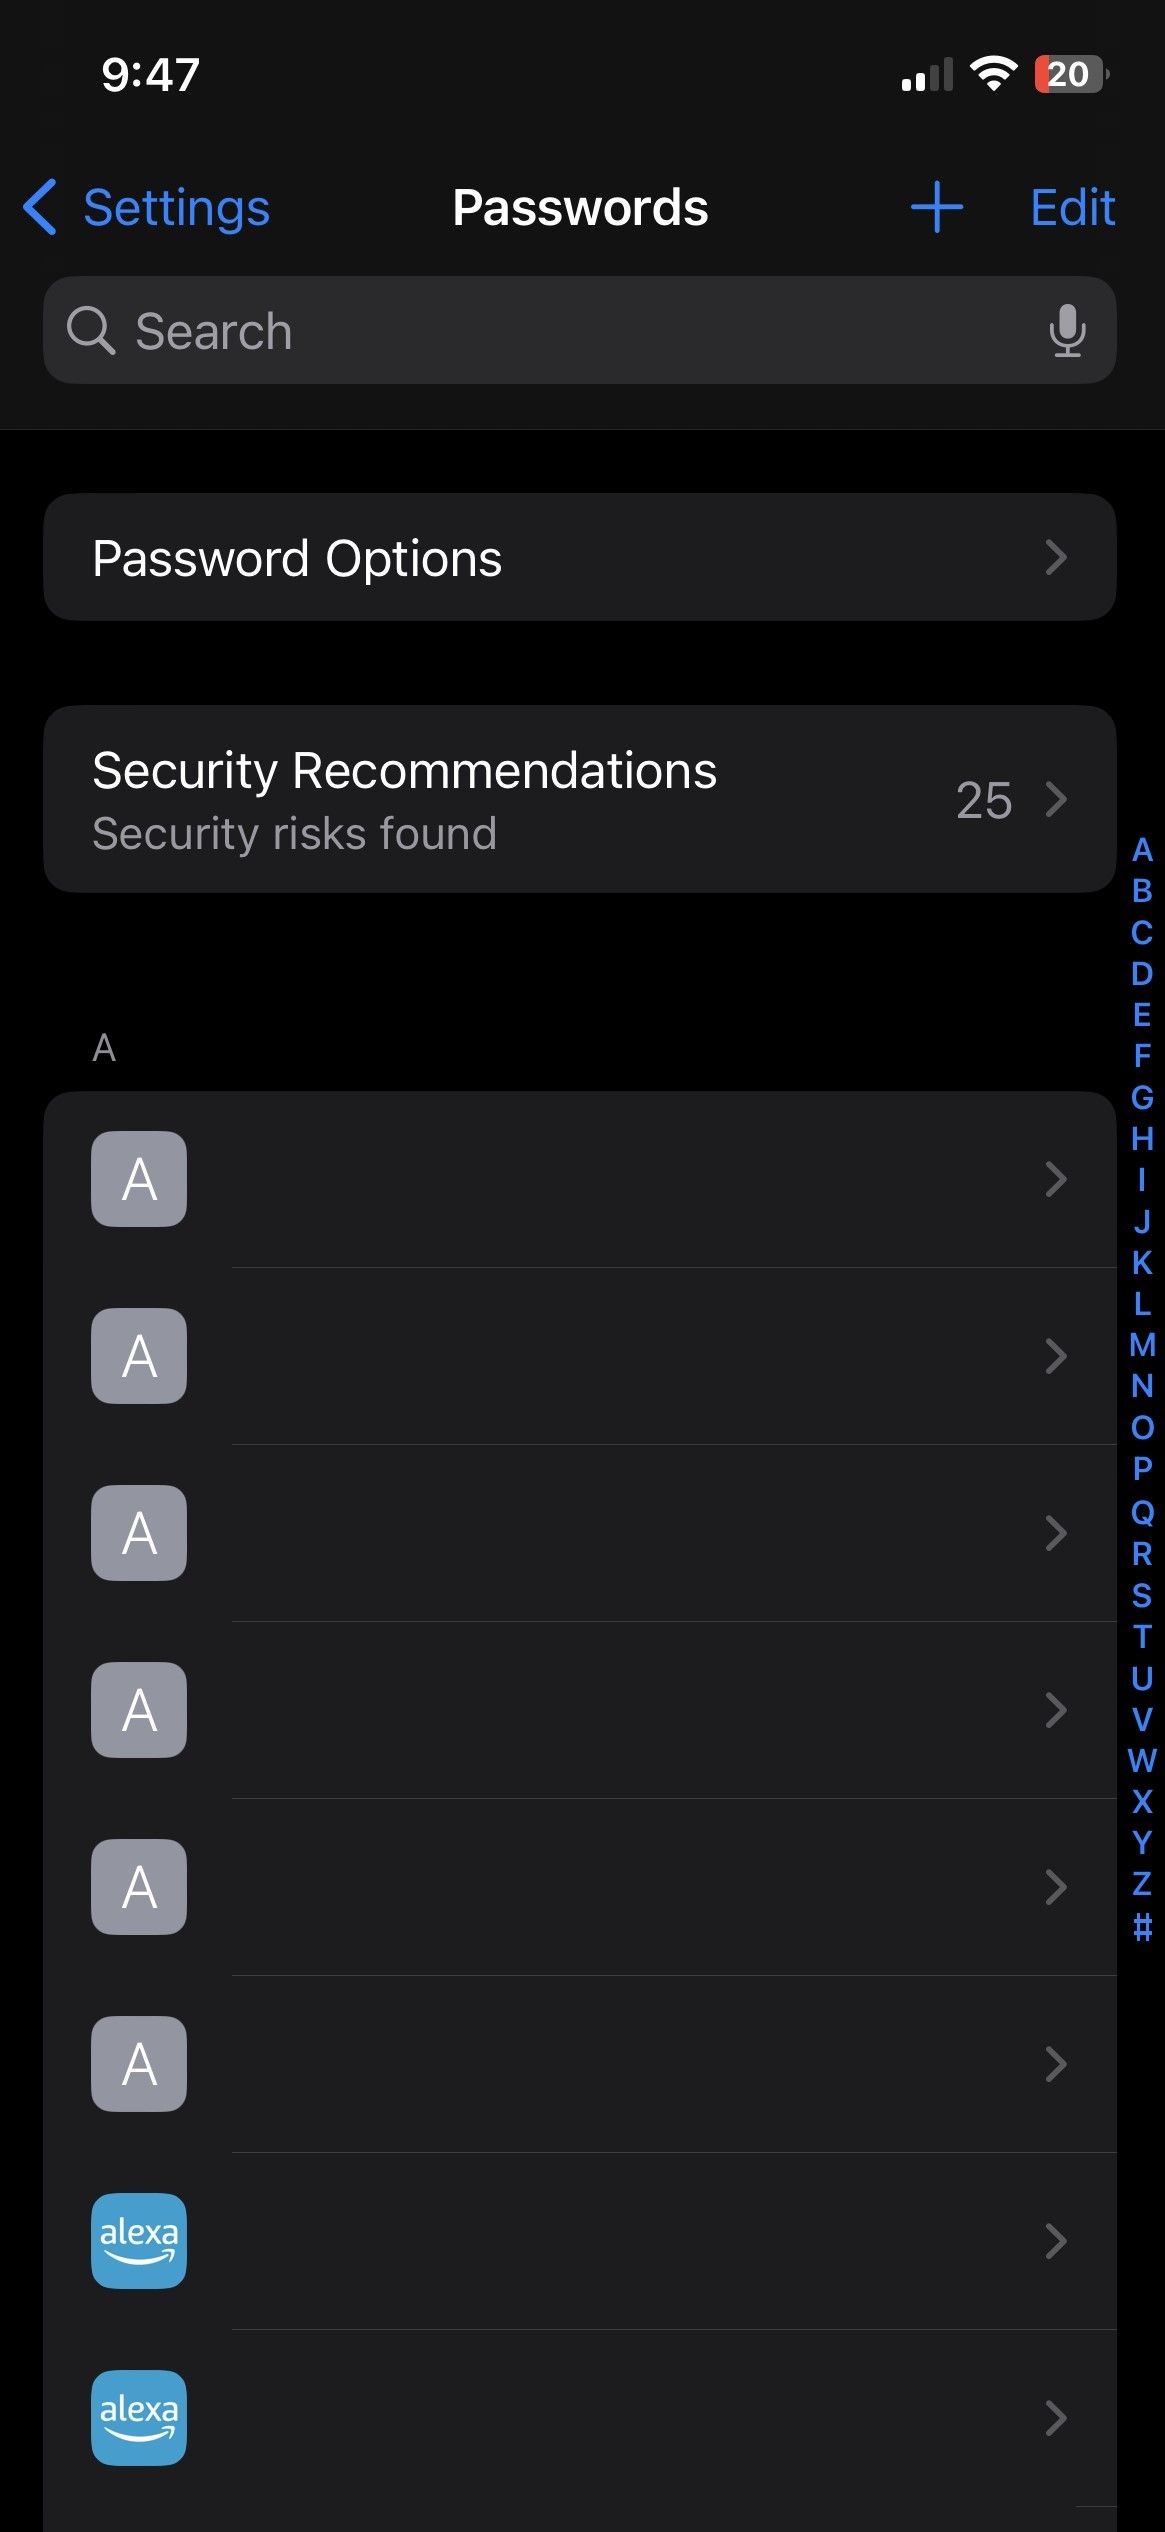 Password list which can be seen in iOS's password menu